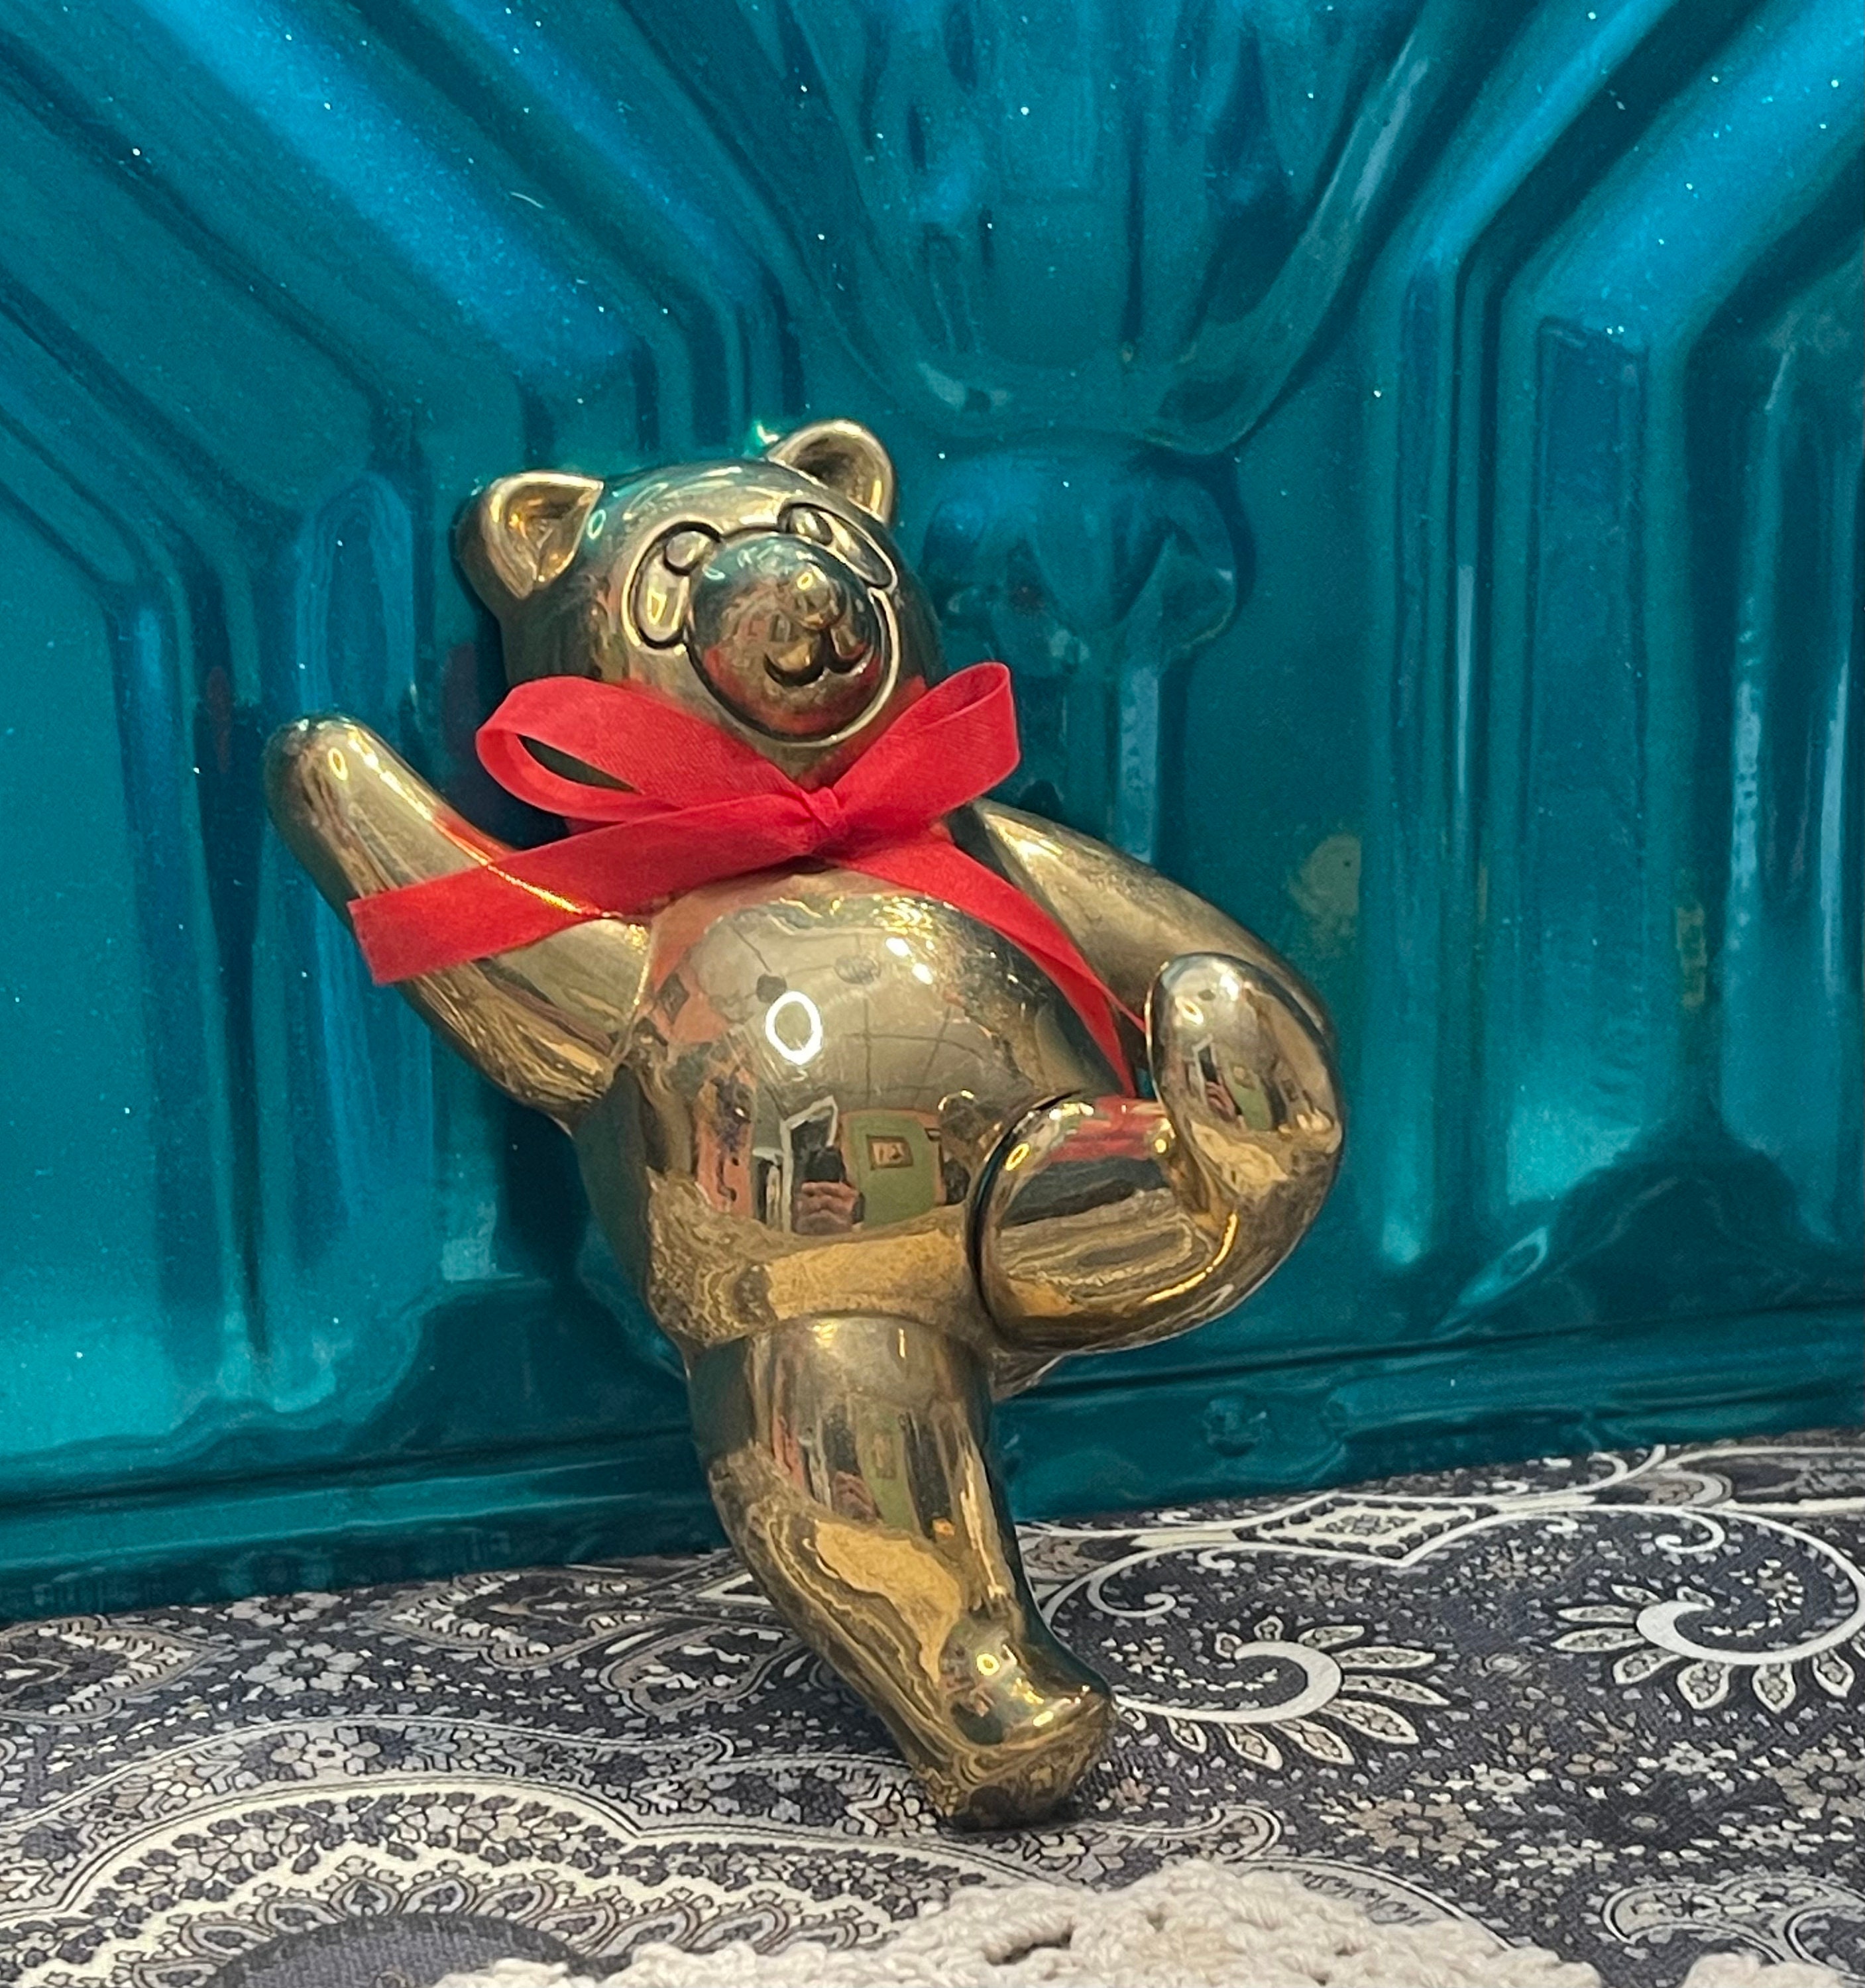 Vintage Brass Teddy Bear Hook for Door or Wall, Robe Towel Hook, Library  Study Decor, Cottage Chic